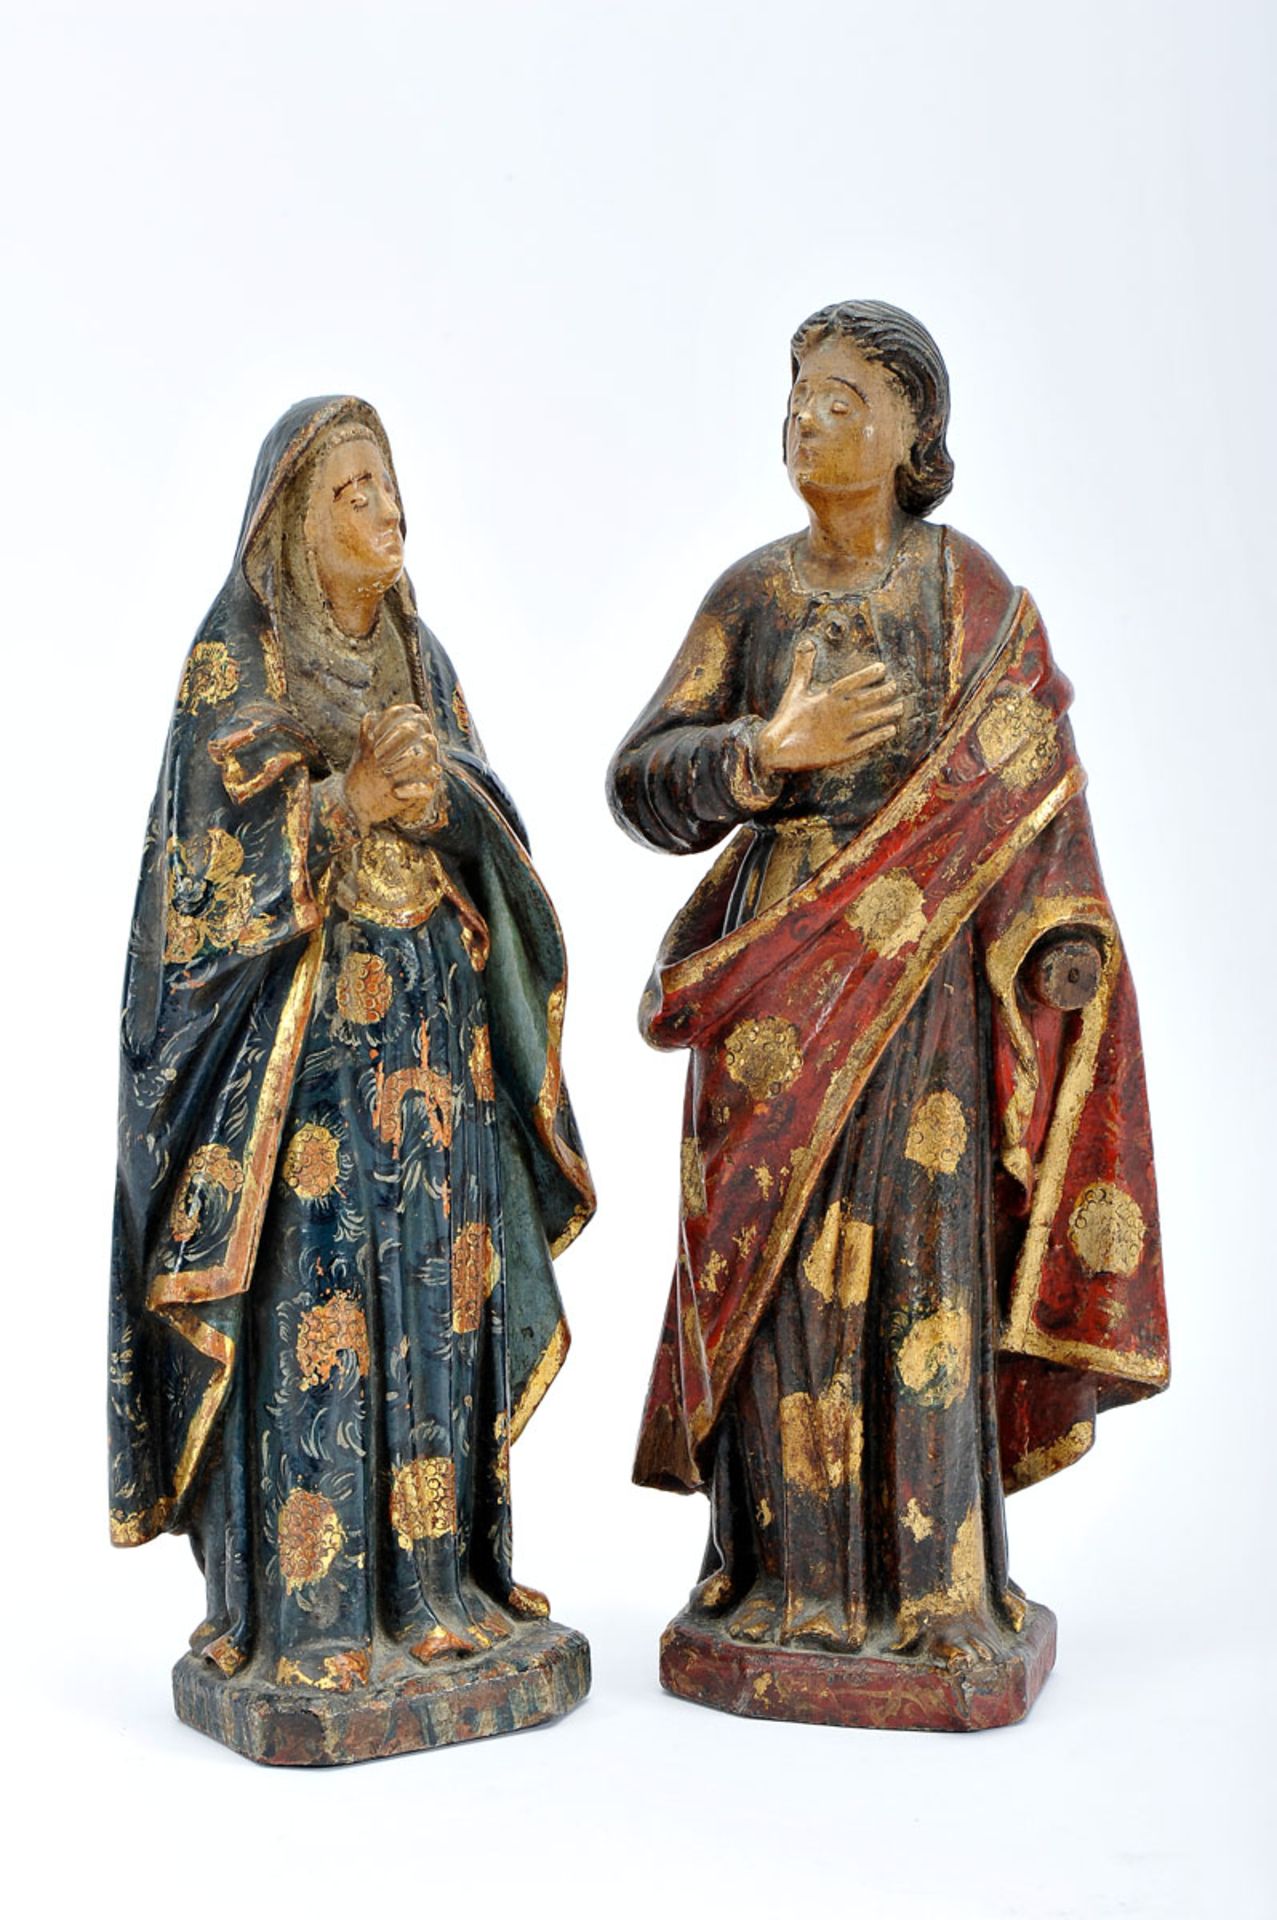 Our Lady and Saint John of Calvary, a pair of gilt and polychrome wooden sculptures, Portuguese,